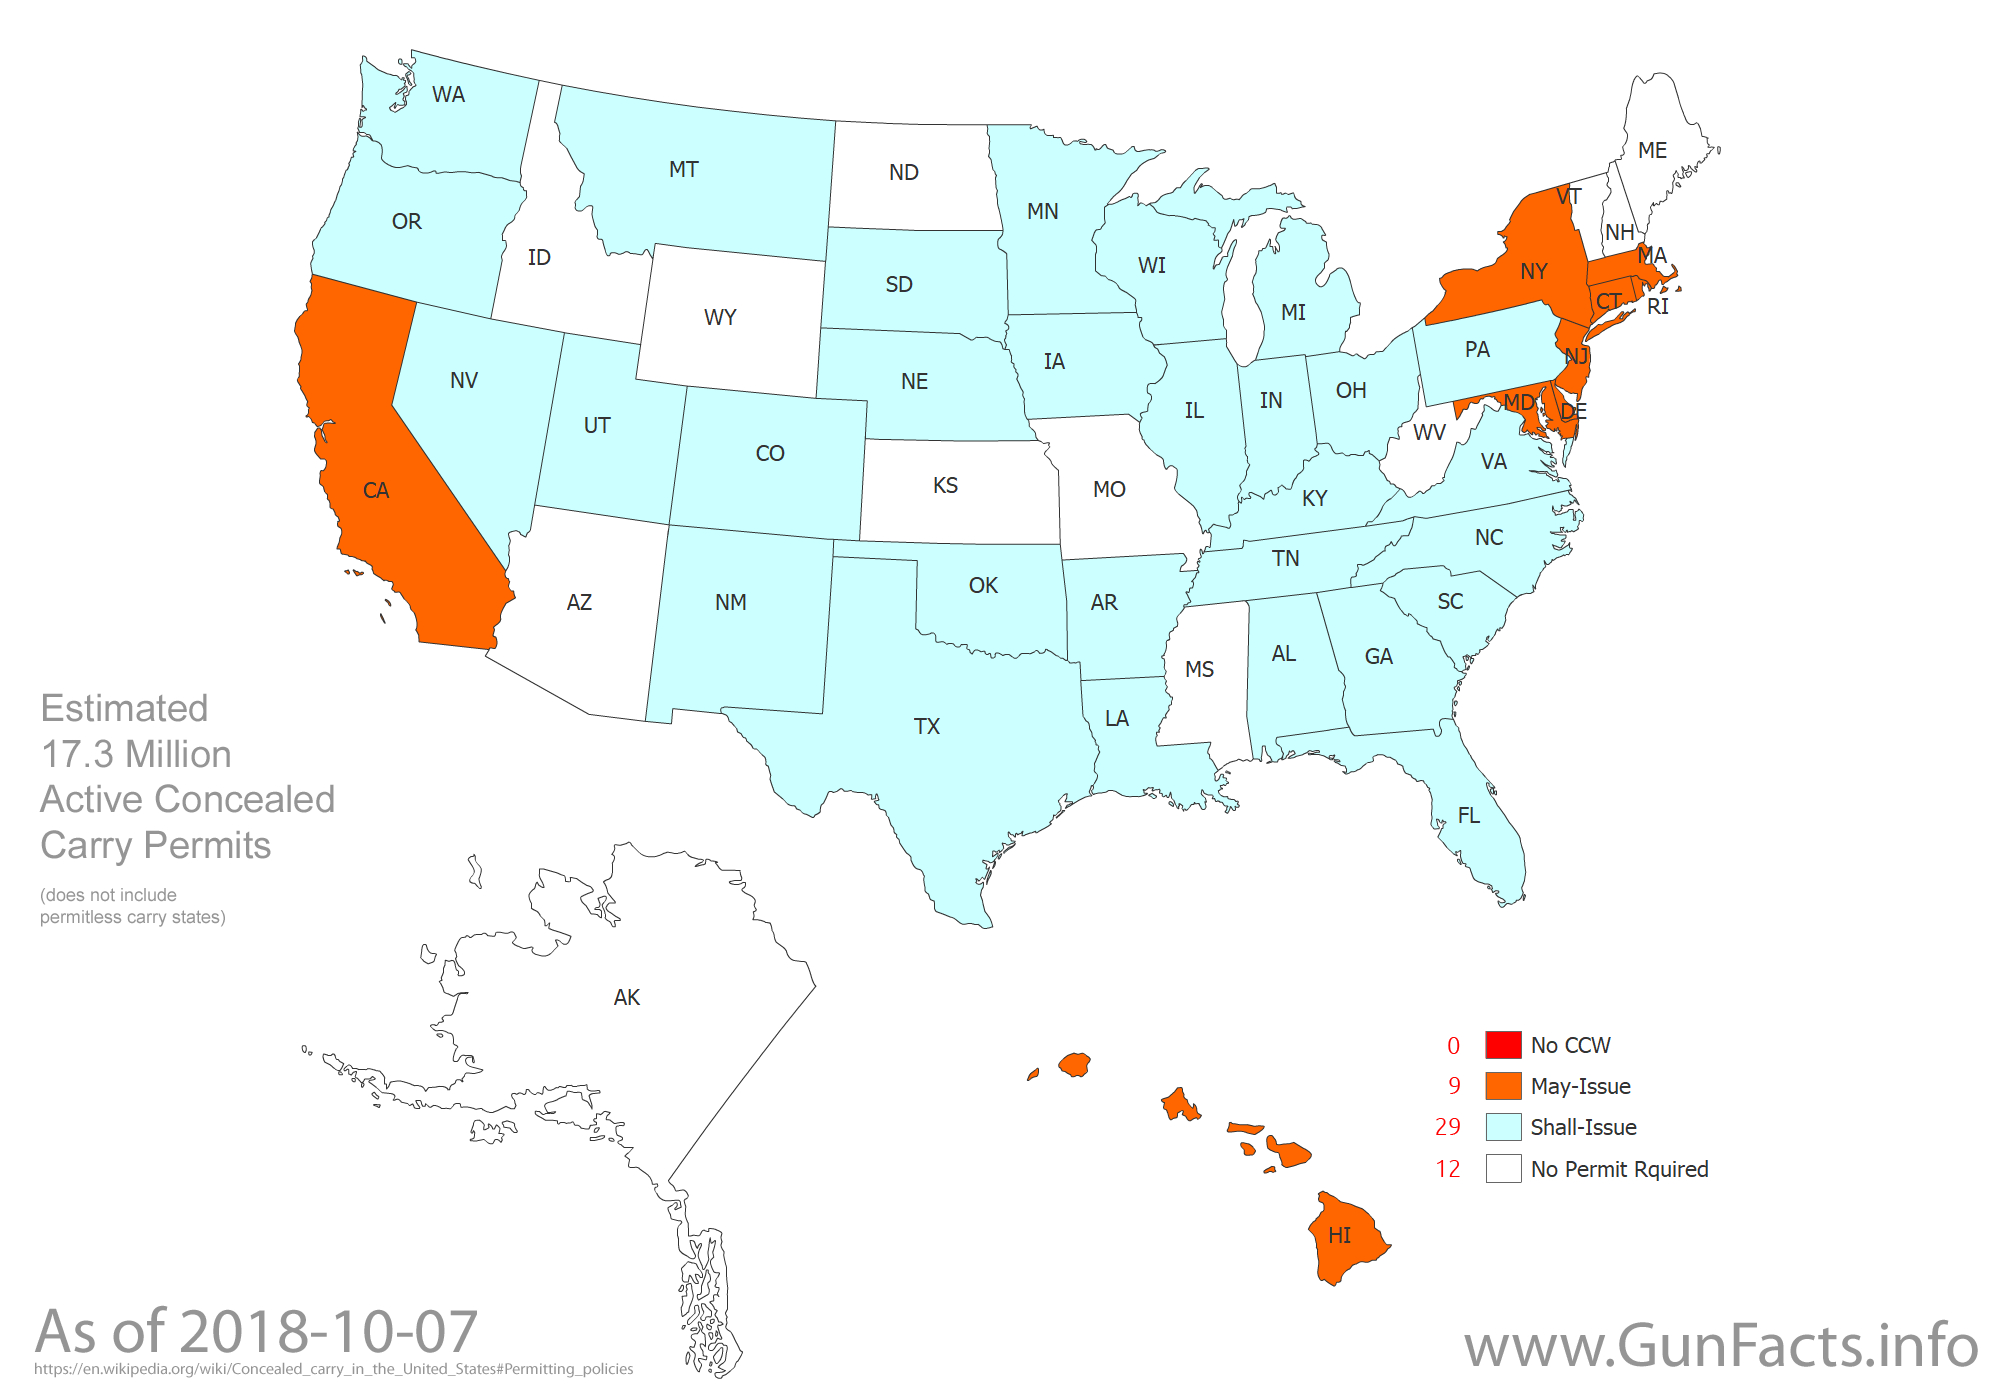 Gun Facts | Gun Control Facts Concerning Concealed Carry - Orange County Florida Crime Map